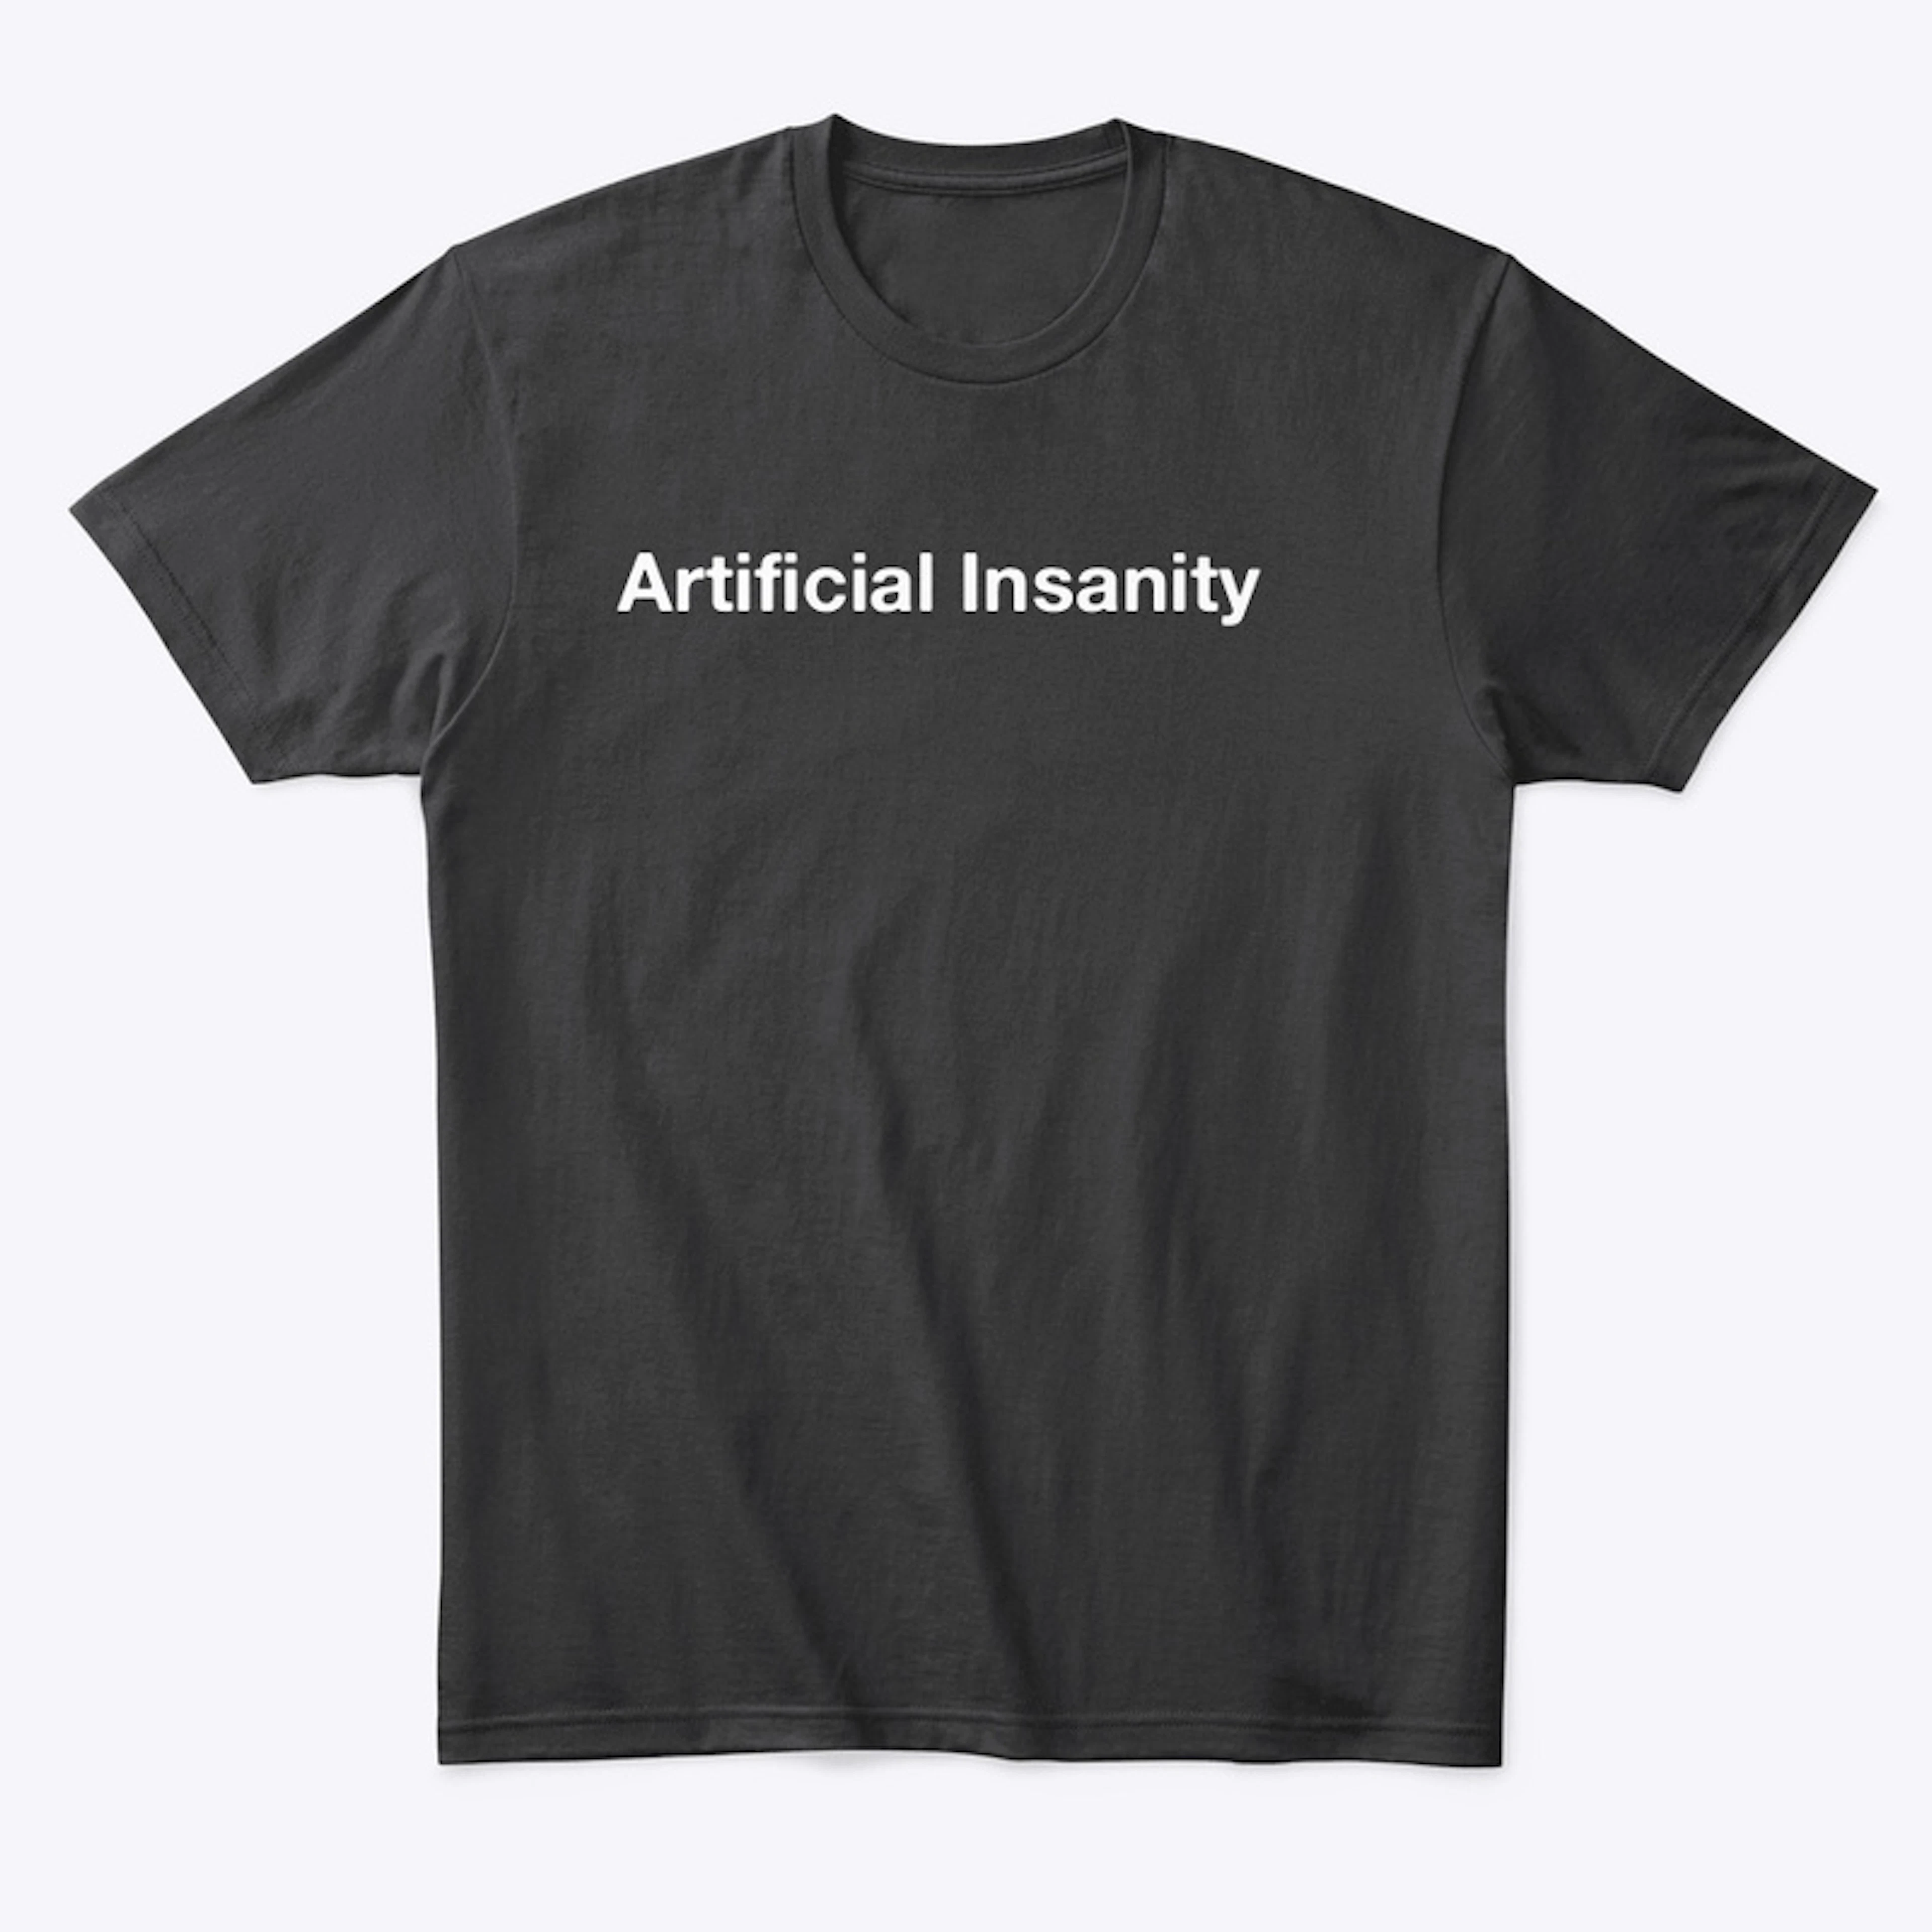 Artificial Insanity